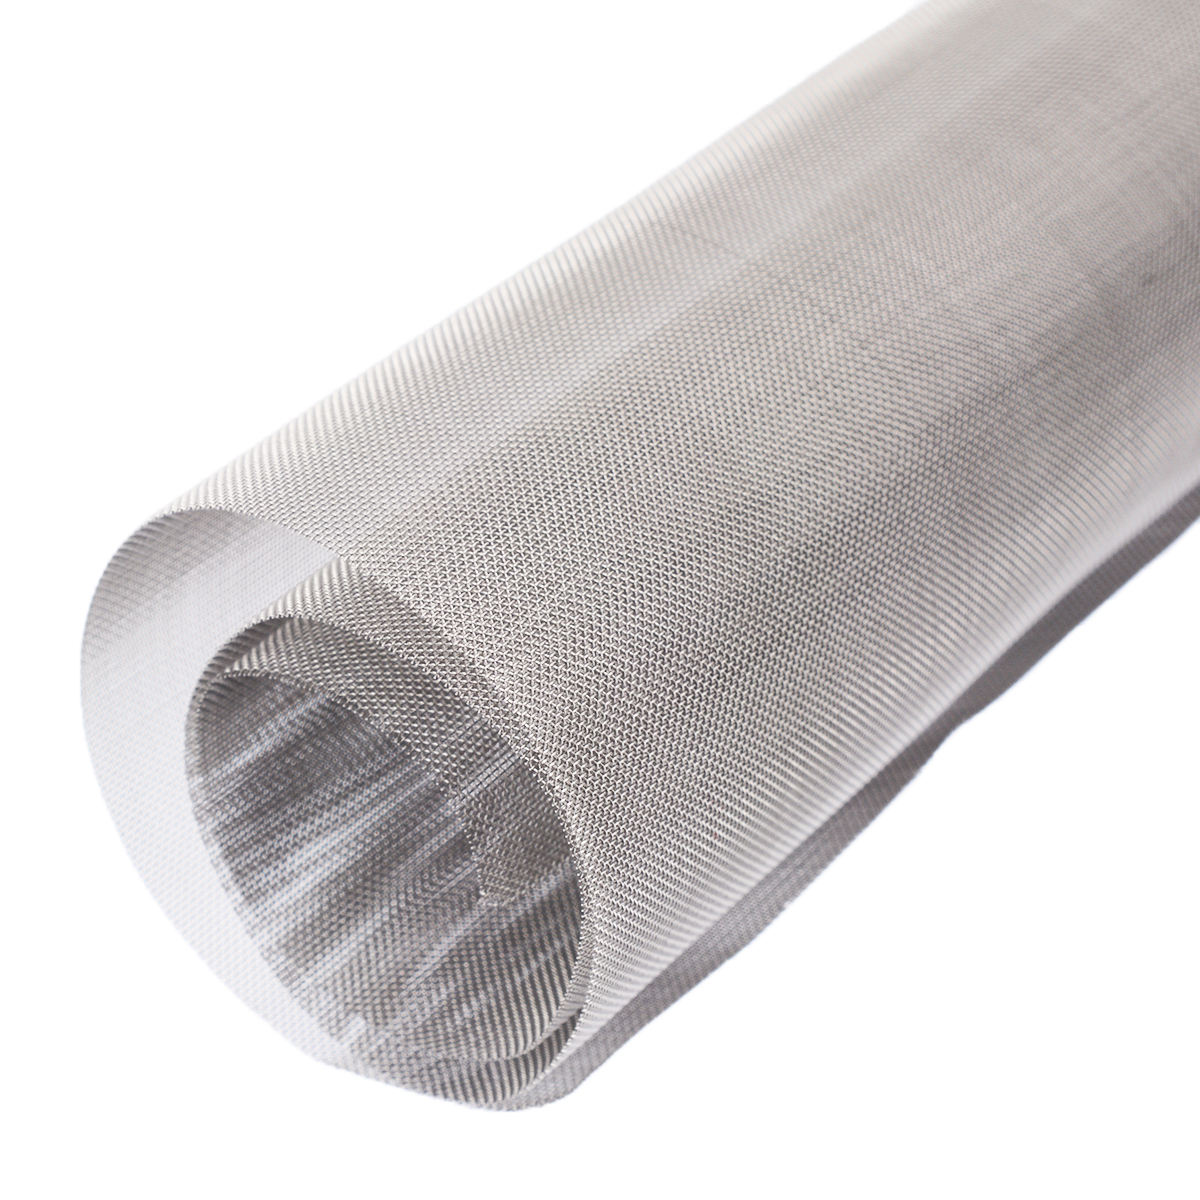 1pc 30*30cm 304 Stainless Steel Mesh Woven Wire Filtration #60 Woven Wire Mesh Cloth Screen For Industrial Tools